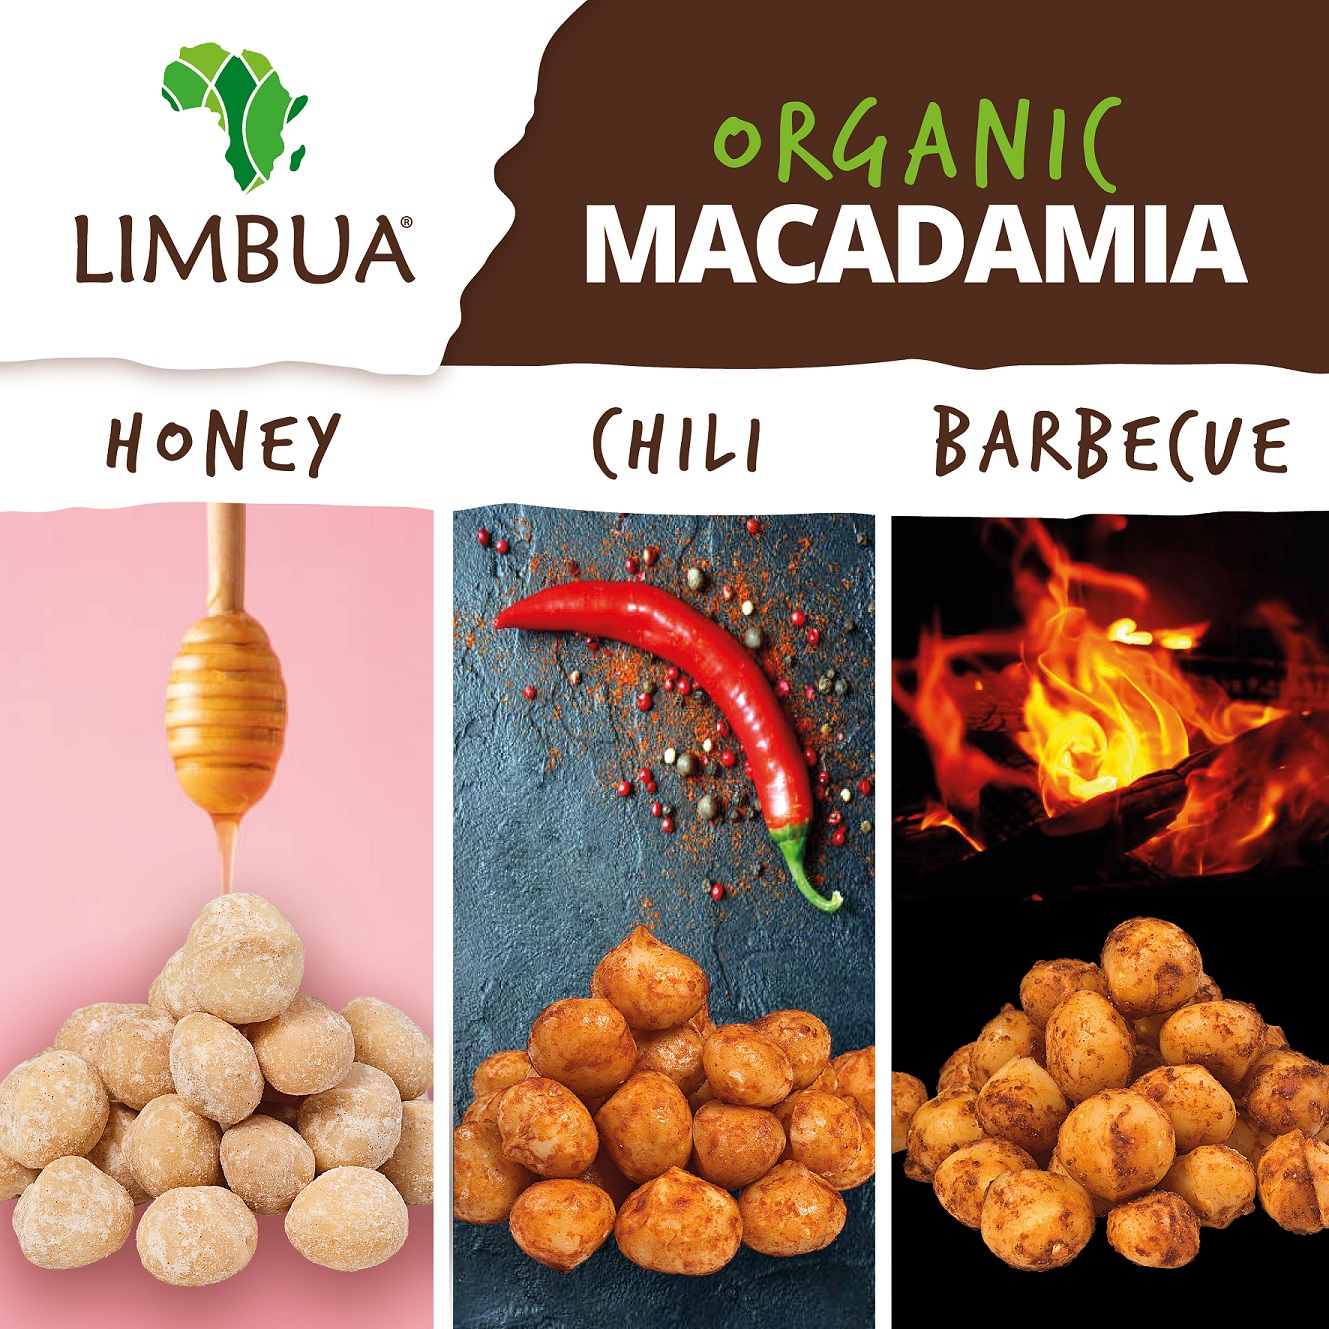 LIMBUA's roasted and handpicked organic macadamia nuts are now available in different flavors